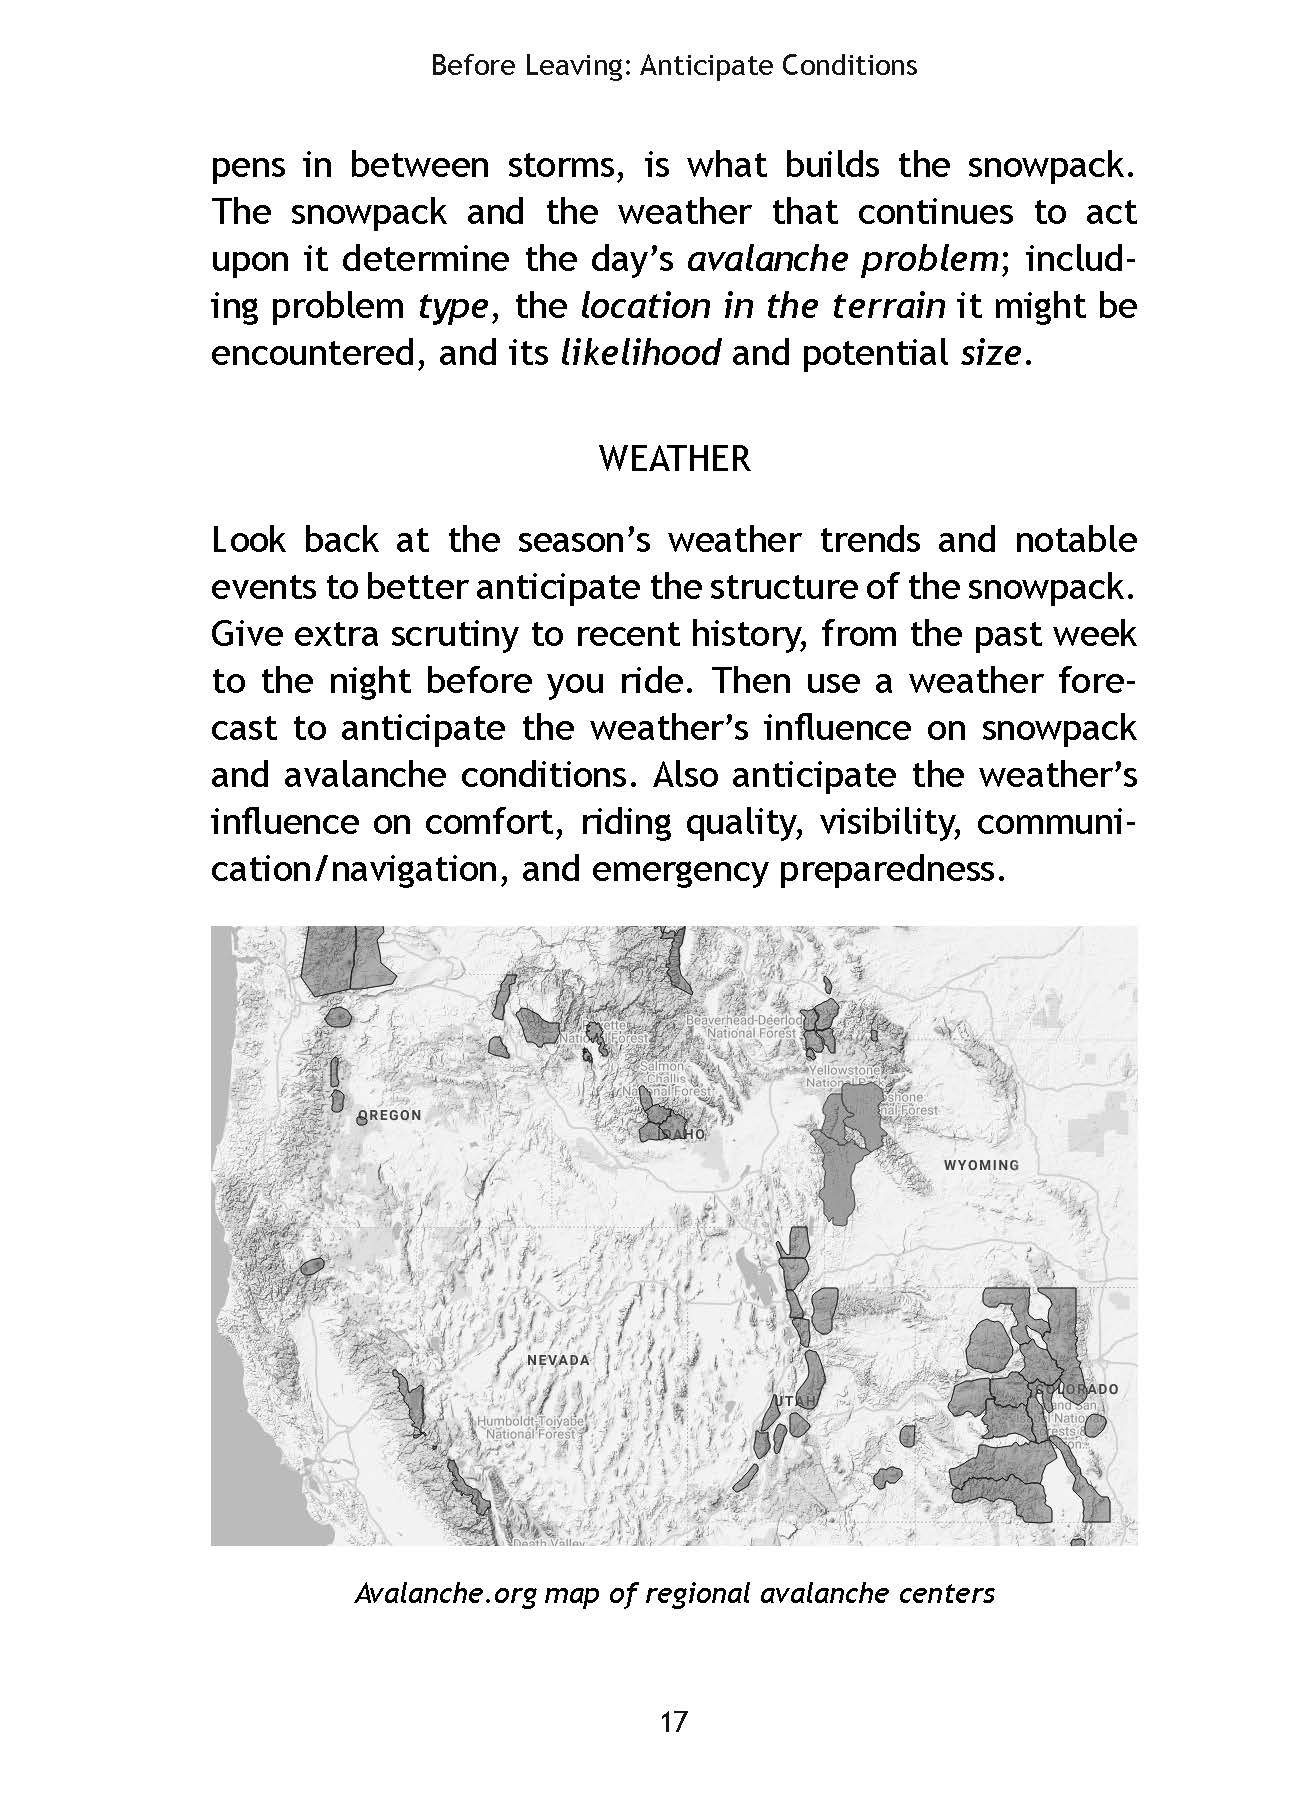 Portfolio example from Sierra Avalanche Center Manual_Page_2.jpg